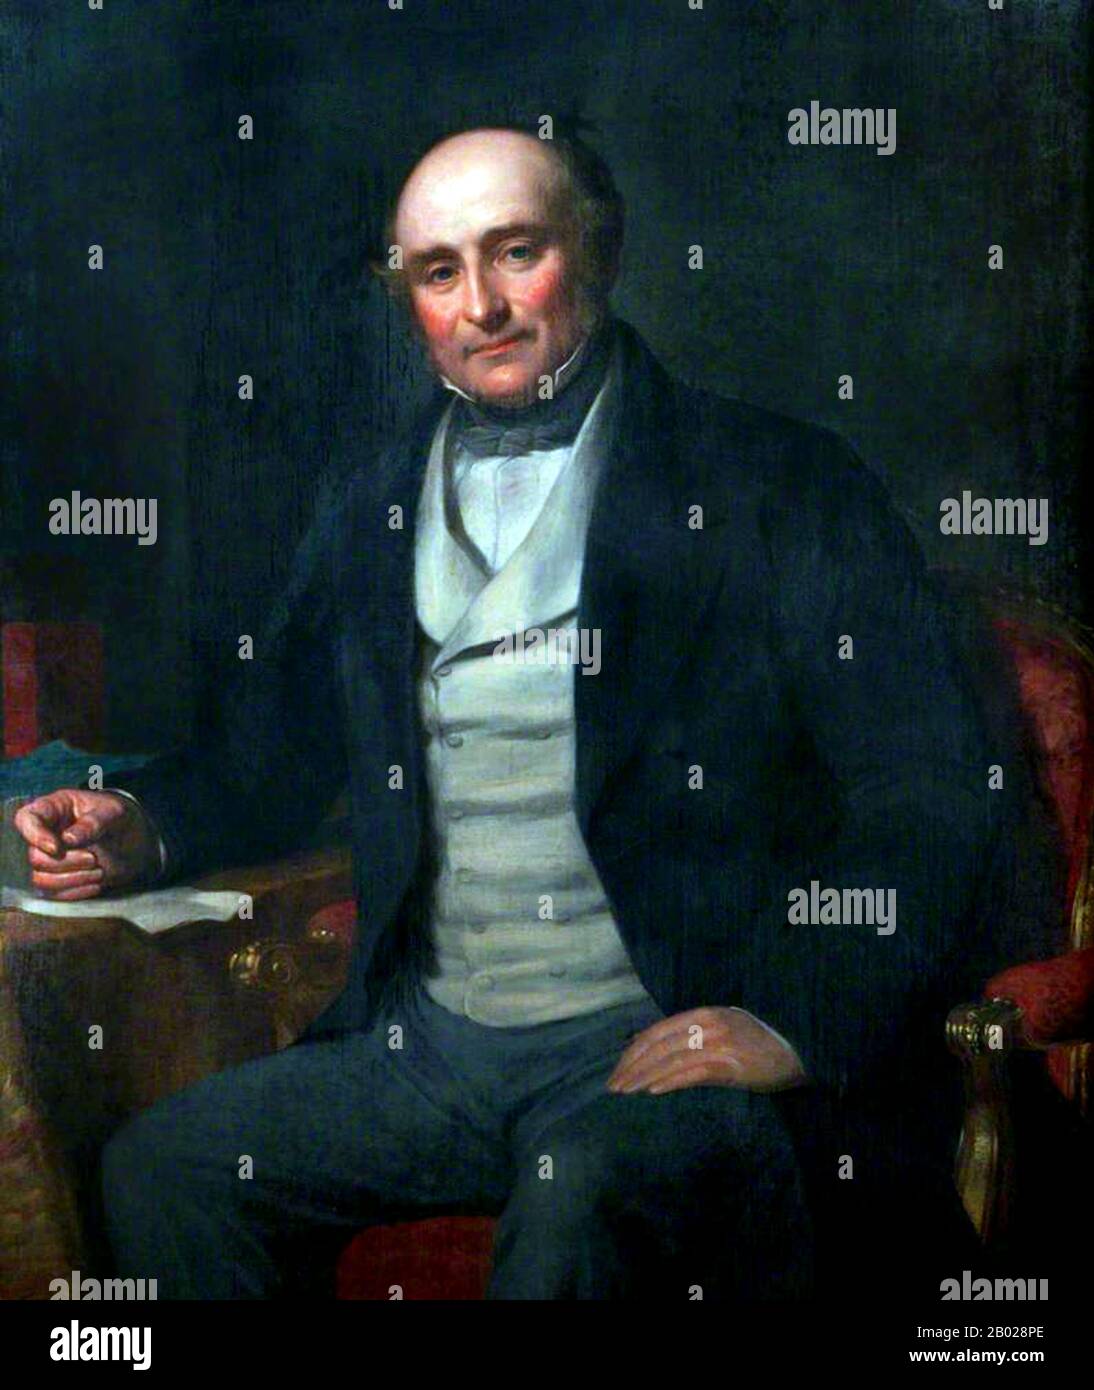 Sir James Nicolas Sutherland Matheson, 1st Baronet (17 October 1796 – 31 December 1878), born in Shiness, Lairg, Sutherland, Scotland, was the son of Captain Donald Matheson, a Scottish trader in India. He attended Edinburgh's Royal High School and the University of Edinburgh.  On 1 July 1832, Jardine, Matheson and Company, a partnership, between William Jardine, James Matheson as senior partners, and Hollingworth Magniac, Alexander Matheson, Jardine's nephew Andrew Johnstone, Matheson's nephew Hugh Matheson, John Abel Smith, and Henry Wright, as the first partners was formed in Canton, and to Stock Photo